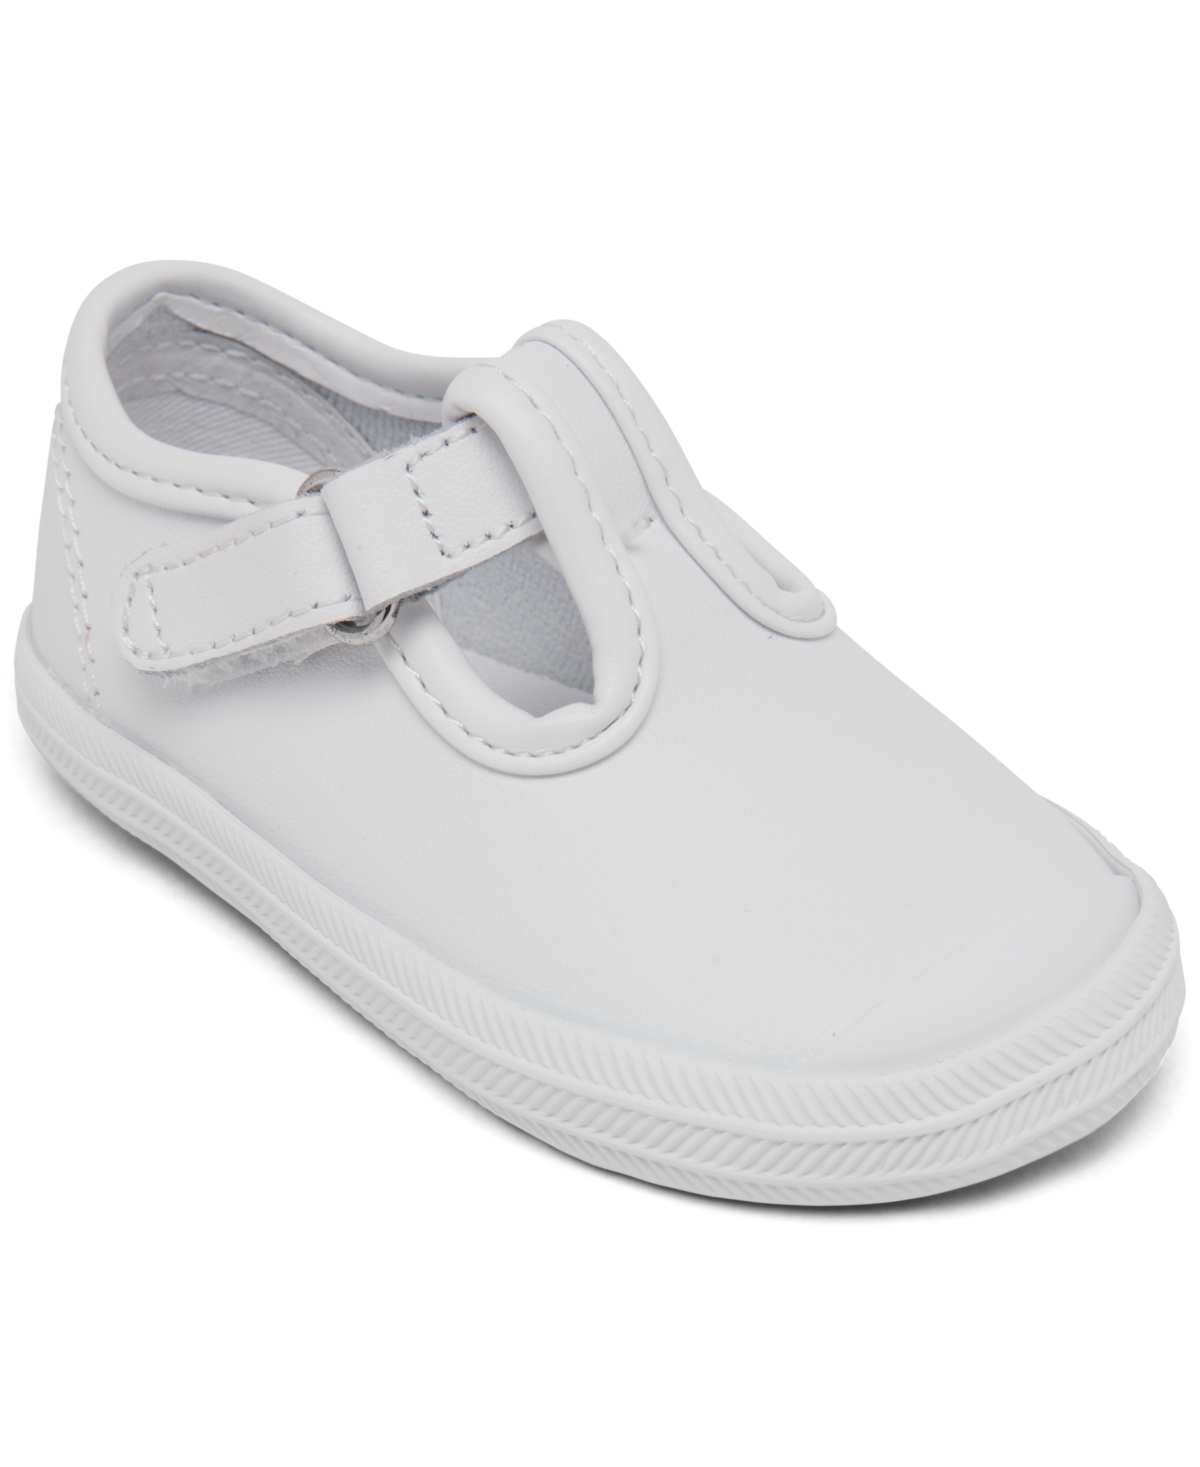 UPC 044214157167 product image for Keds Champion Toe-Cap T-Strap Shoes, Baby Girls & Toddler Girls | upcitemdb.com